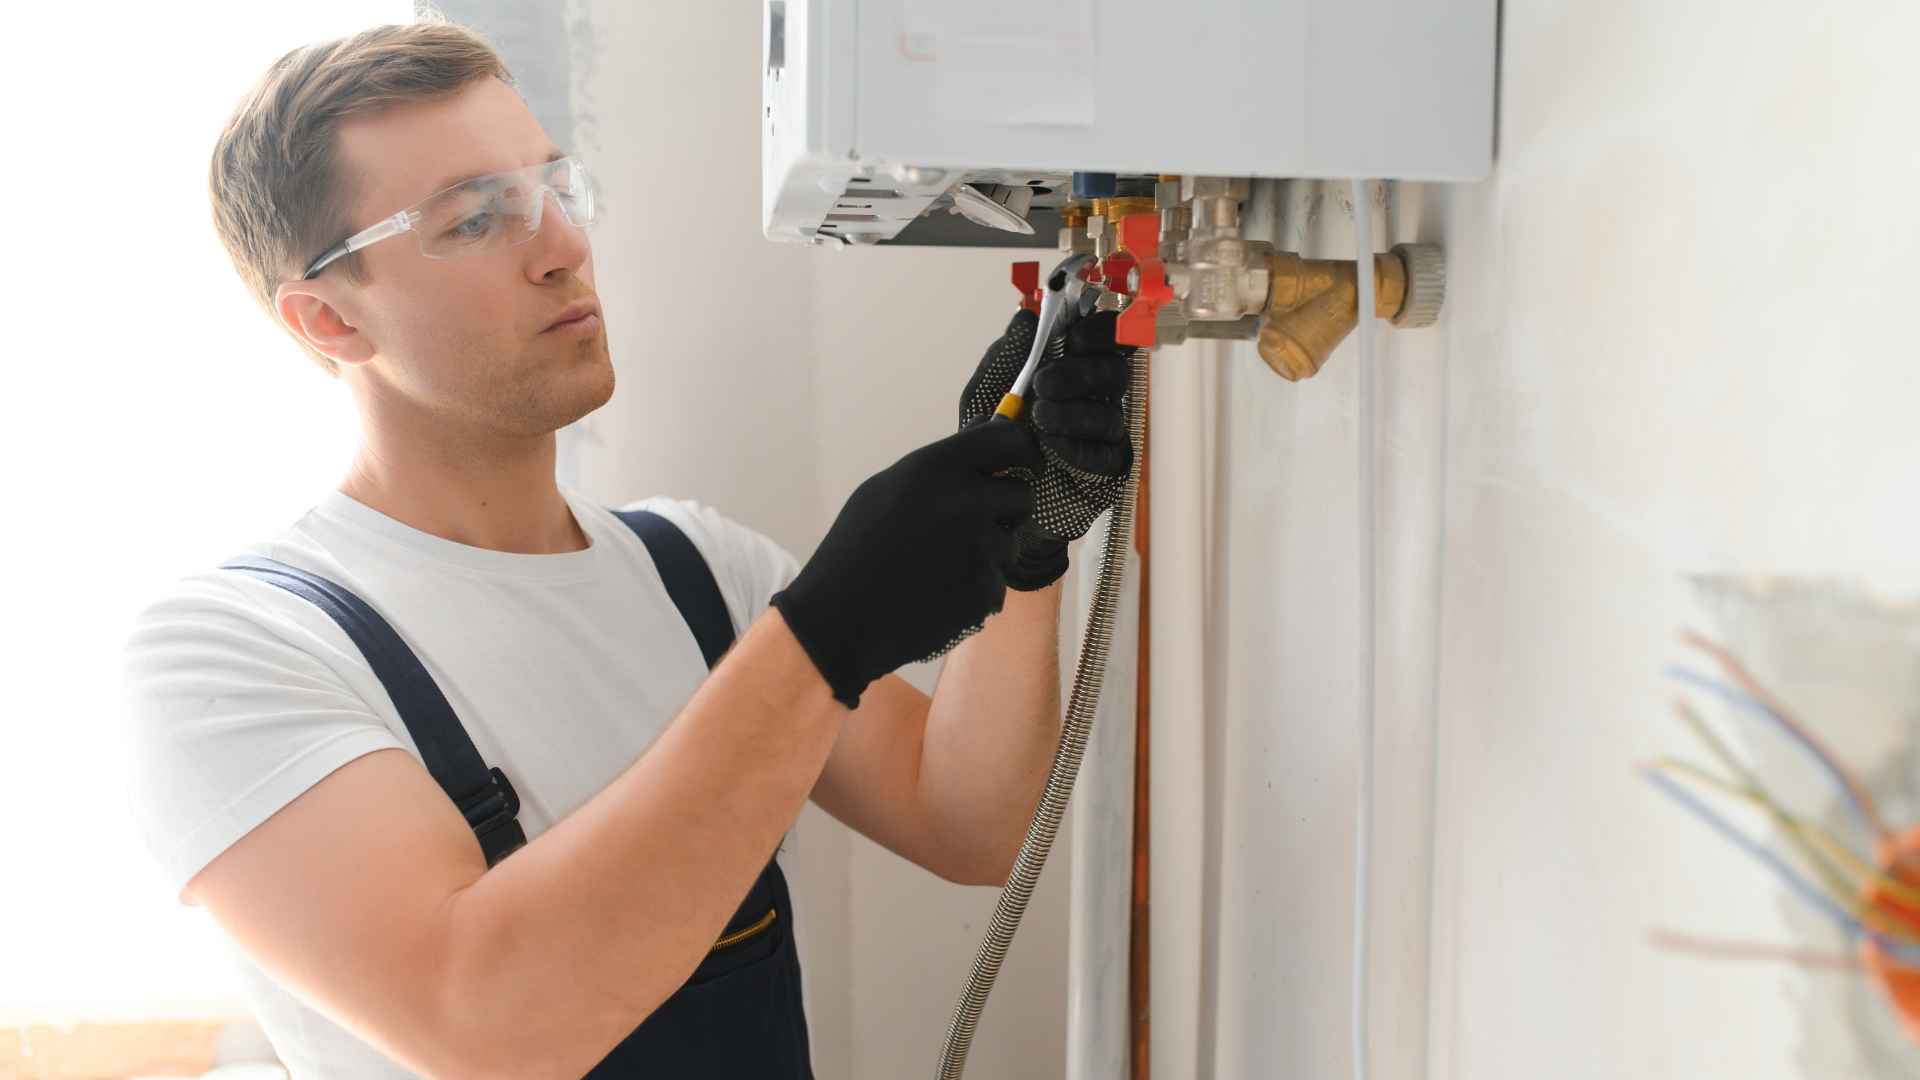 A plumber wearing safety goggles adjusts a residential gas line water heater.